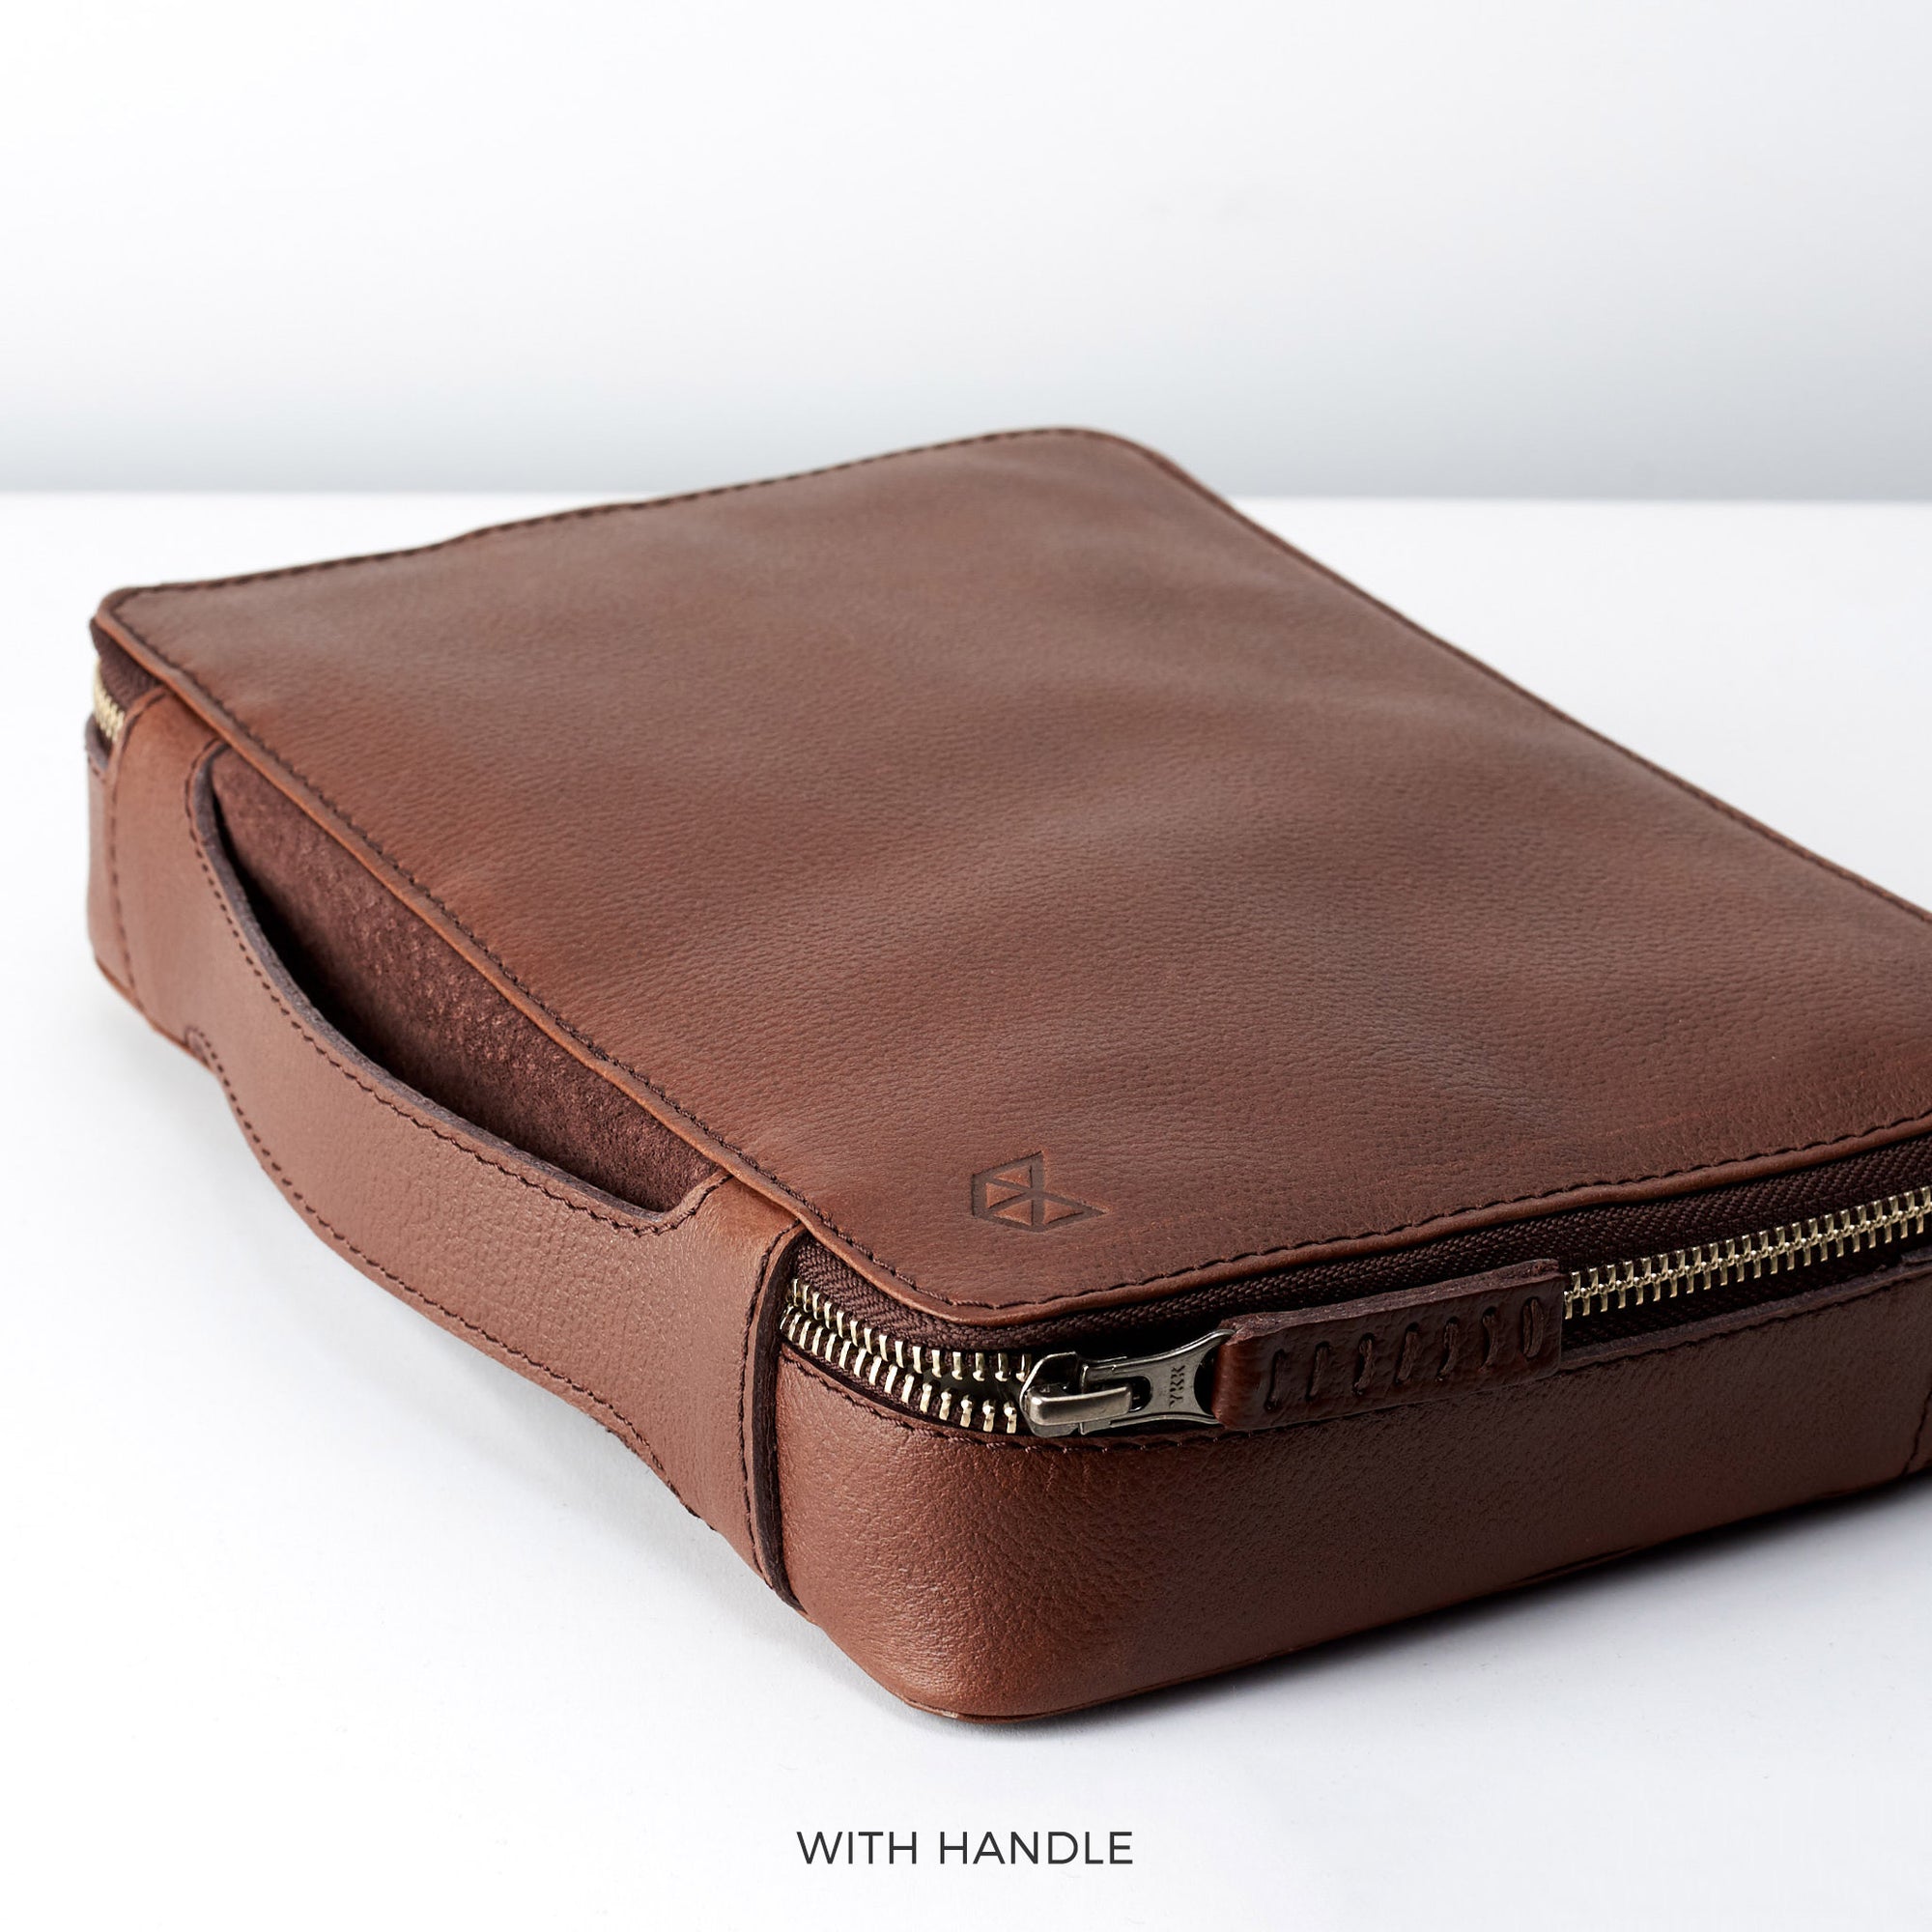 Leather handle. Brown travel gadget organizer. Best tech bag for travel by Capra Leather. 